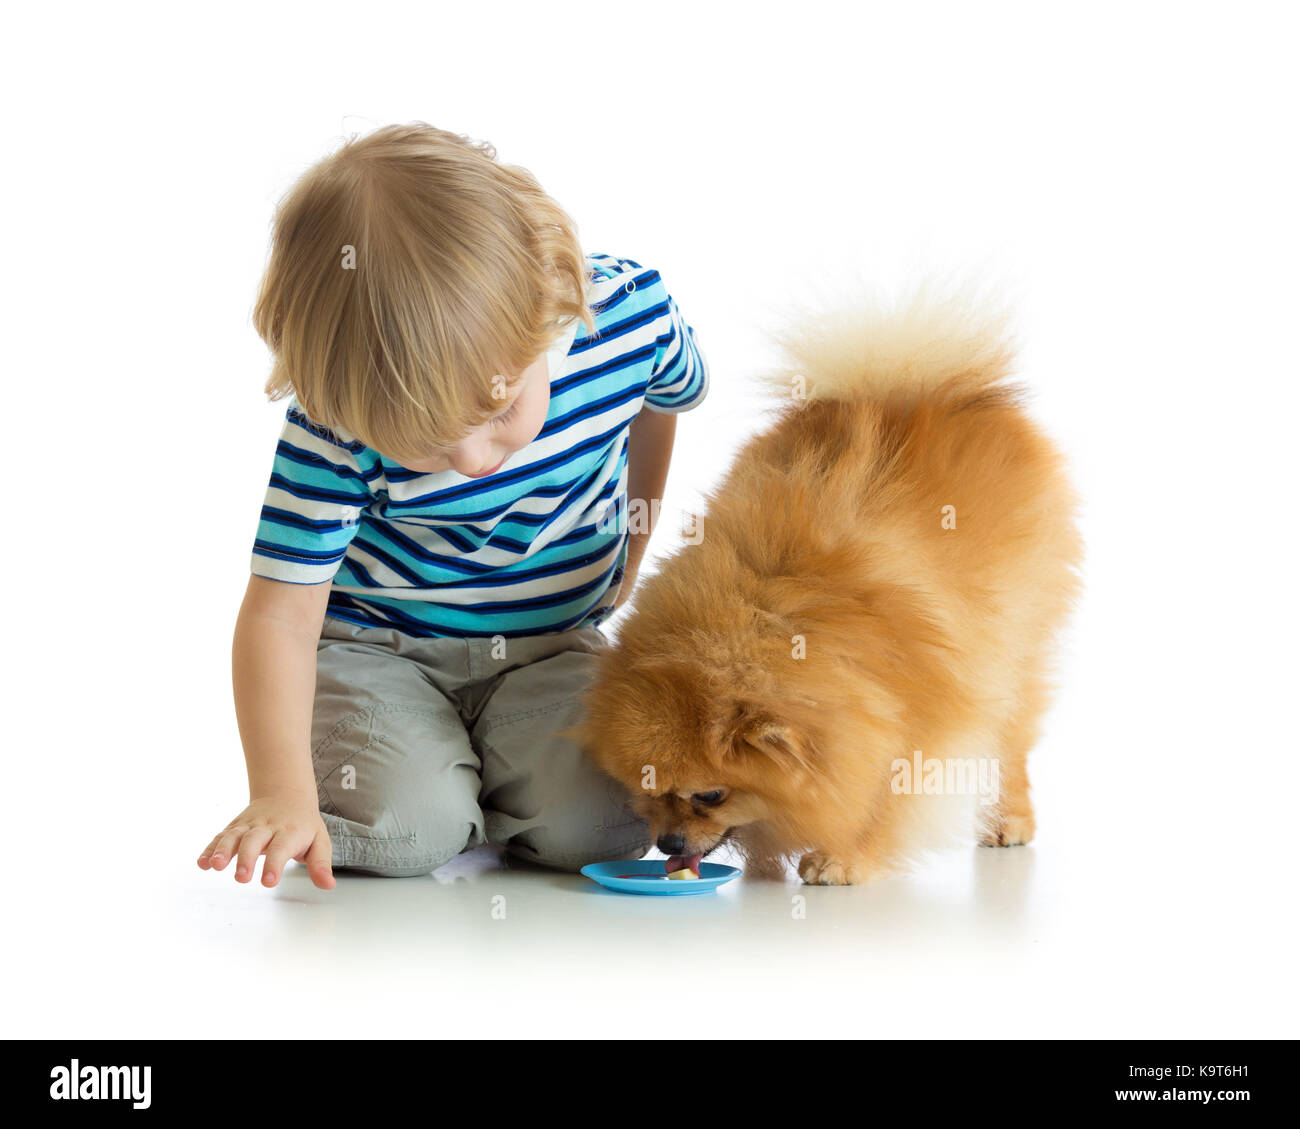 Peu chiild boy feeding dog isolated on white Banque D'Images